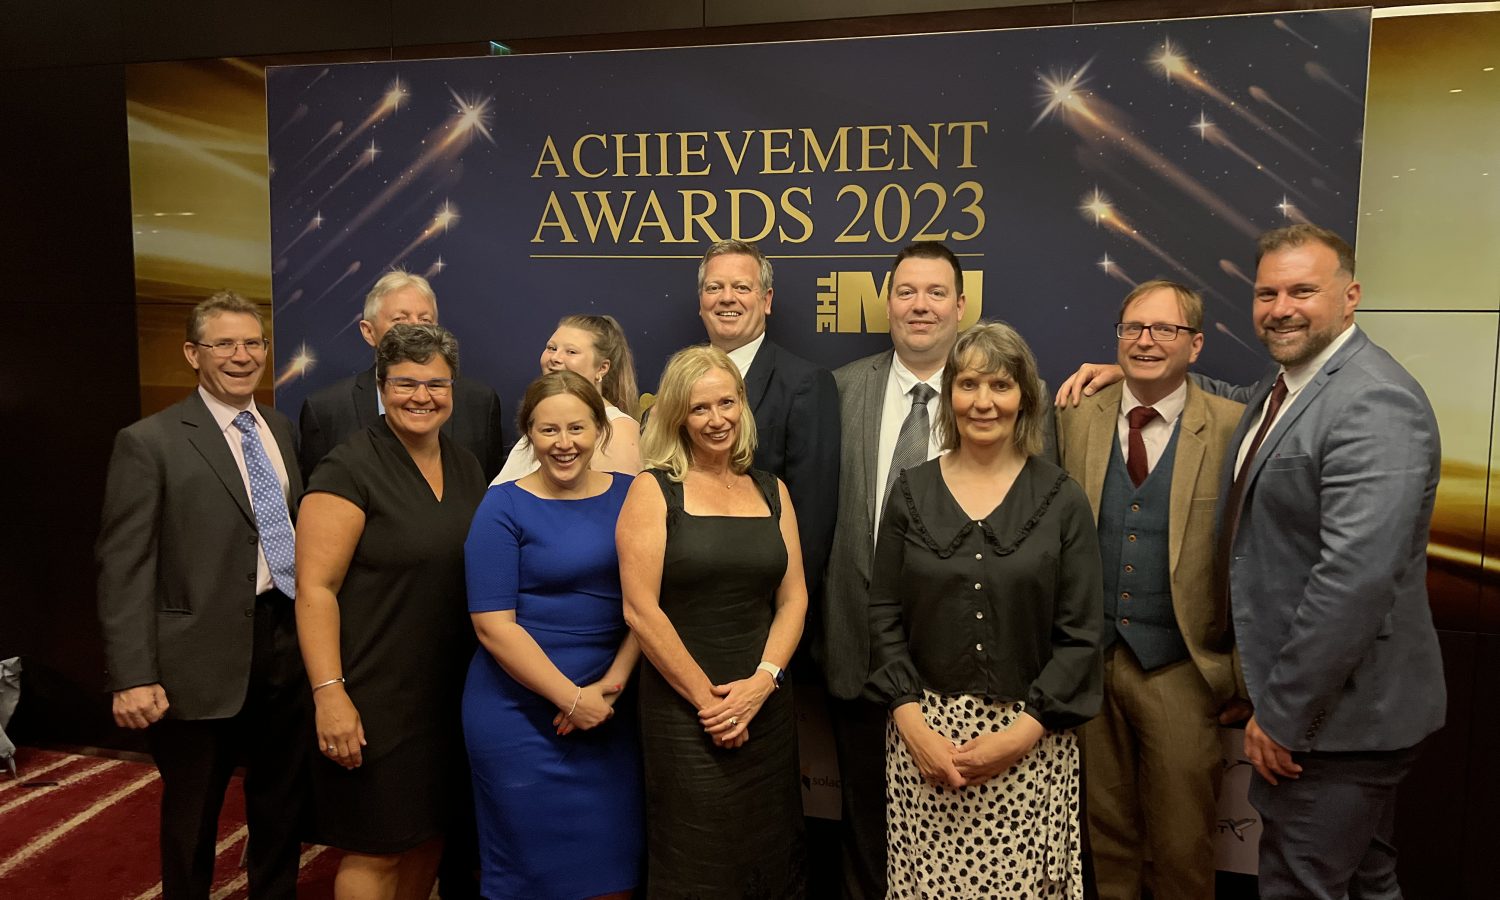 Eleven people stood smiling in front of an awards banner which reads "achievement awards 2023". They are smartly dressed